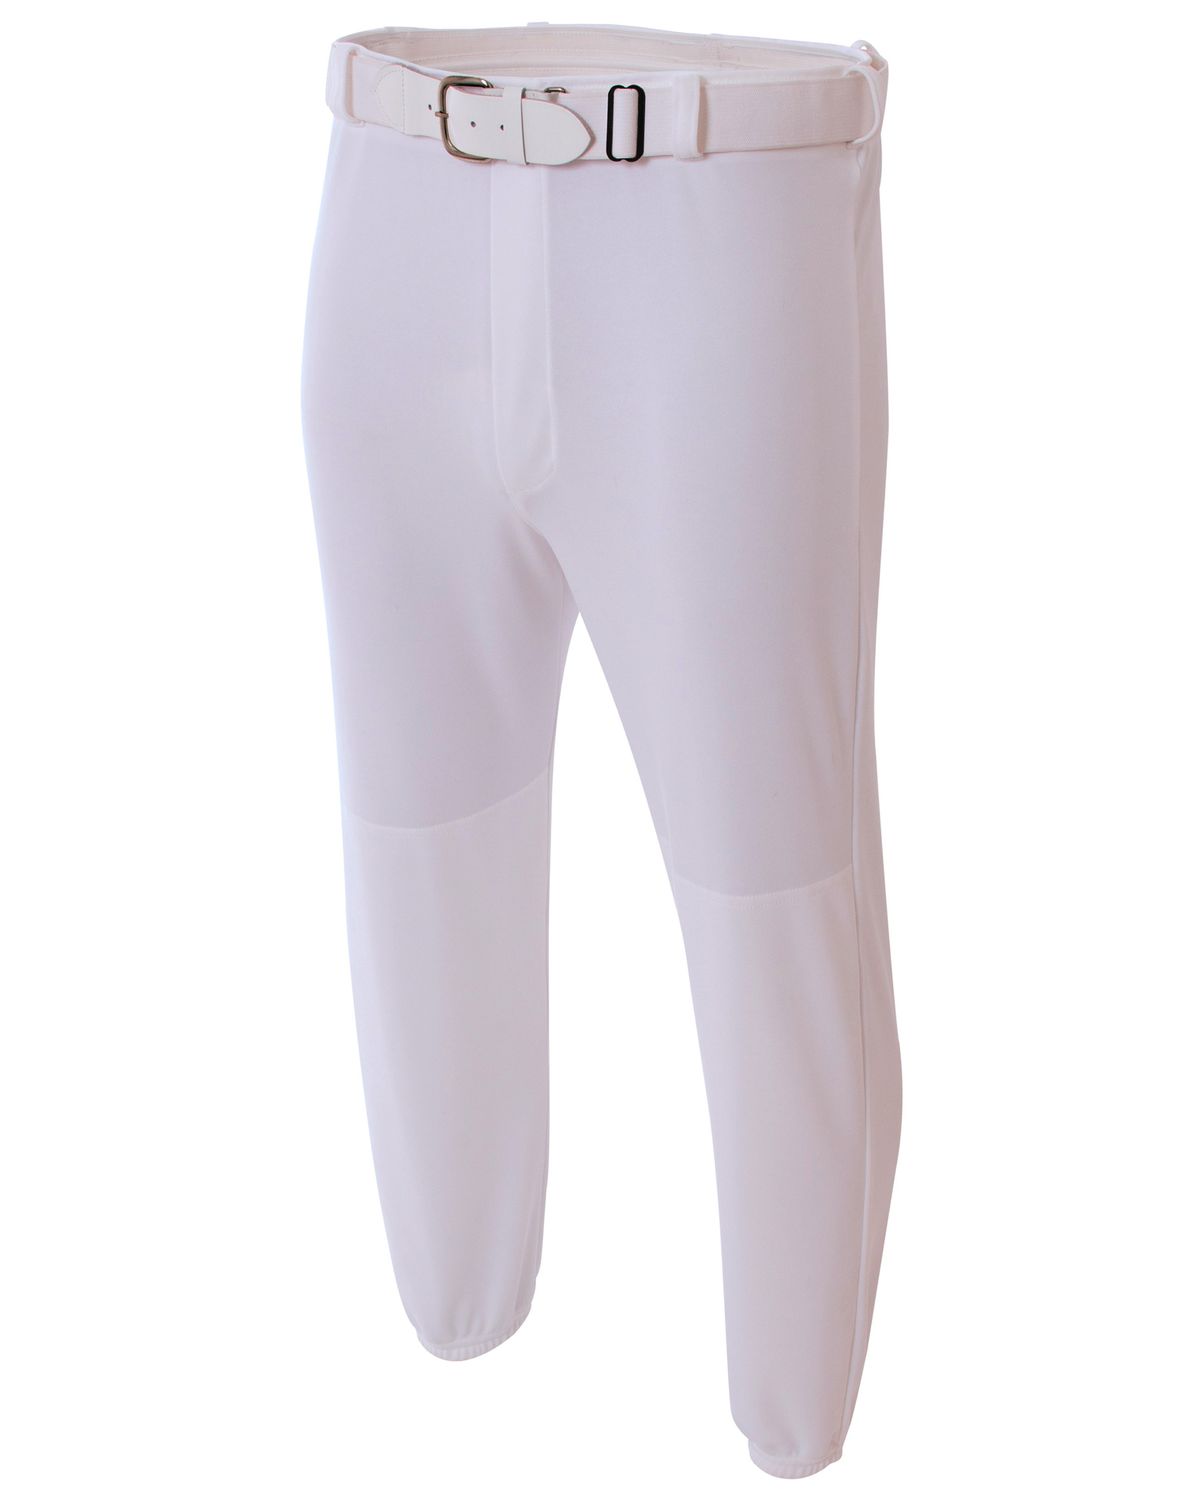 'A4 N6195 Adult Double Play Polyester Baseball Pant with Elastic Waist and Belt Loops'